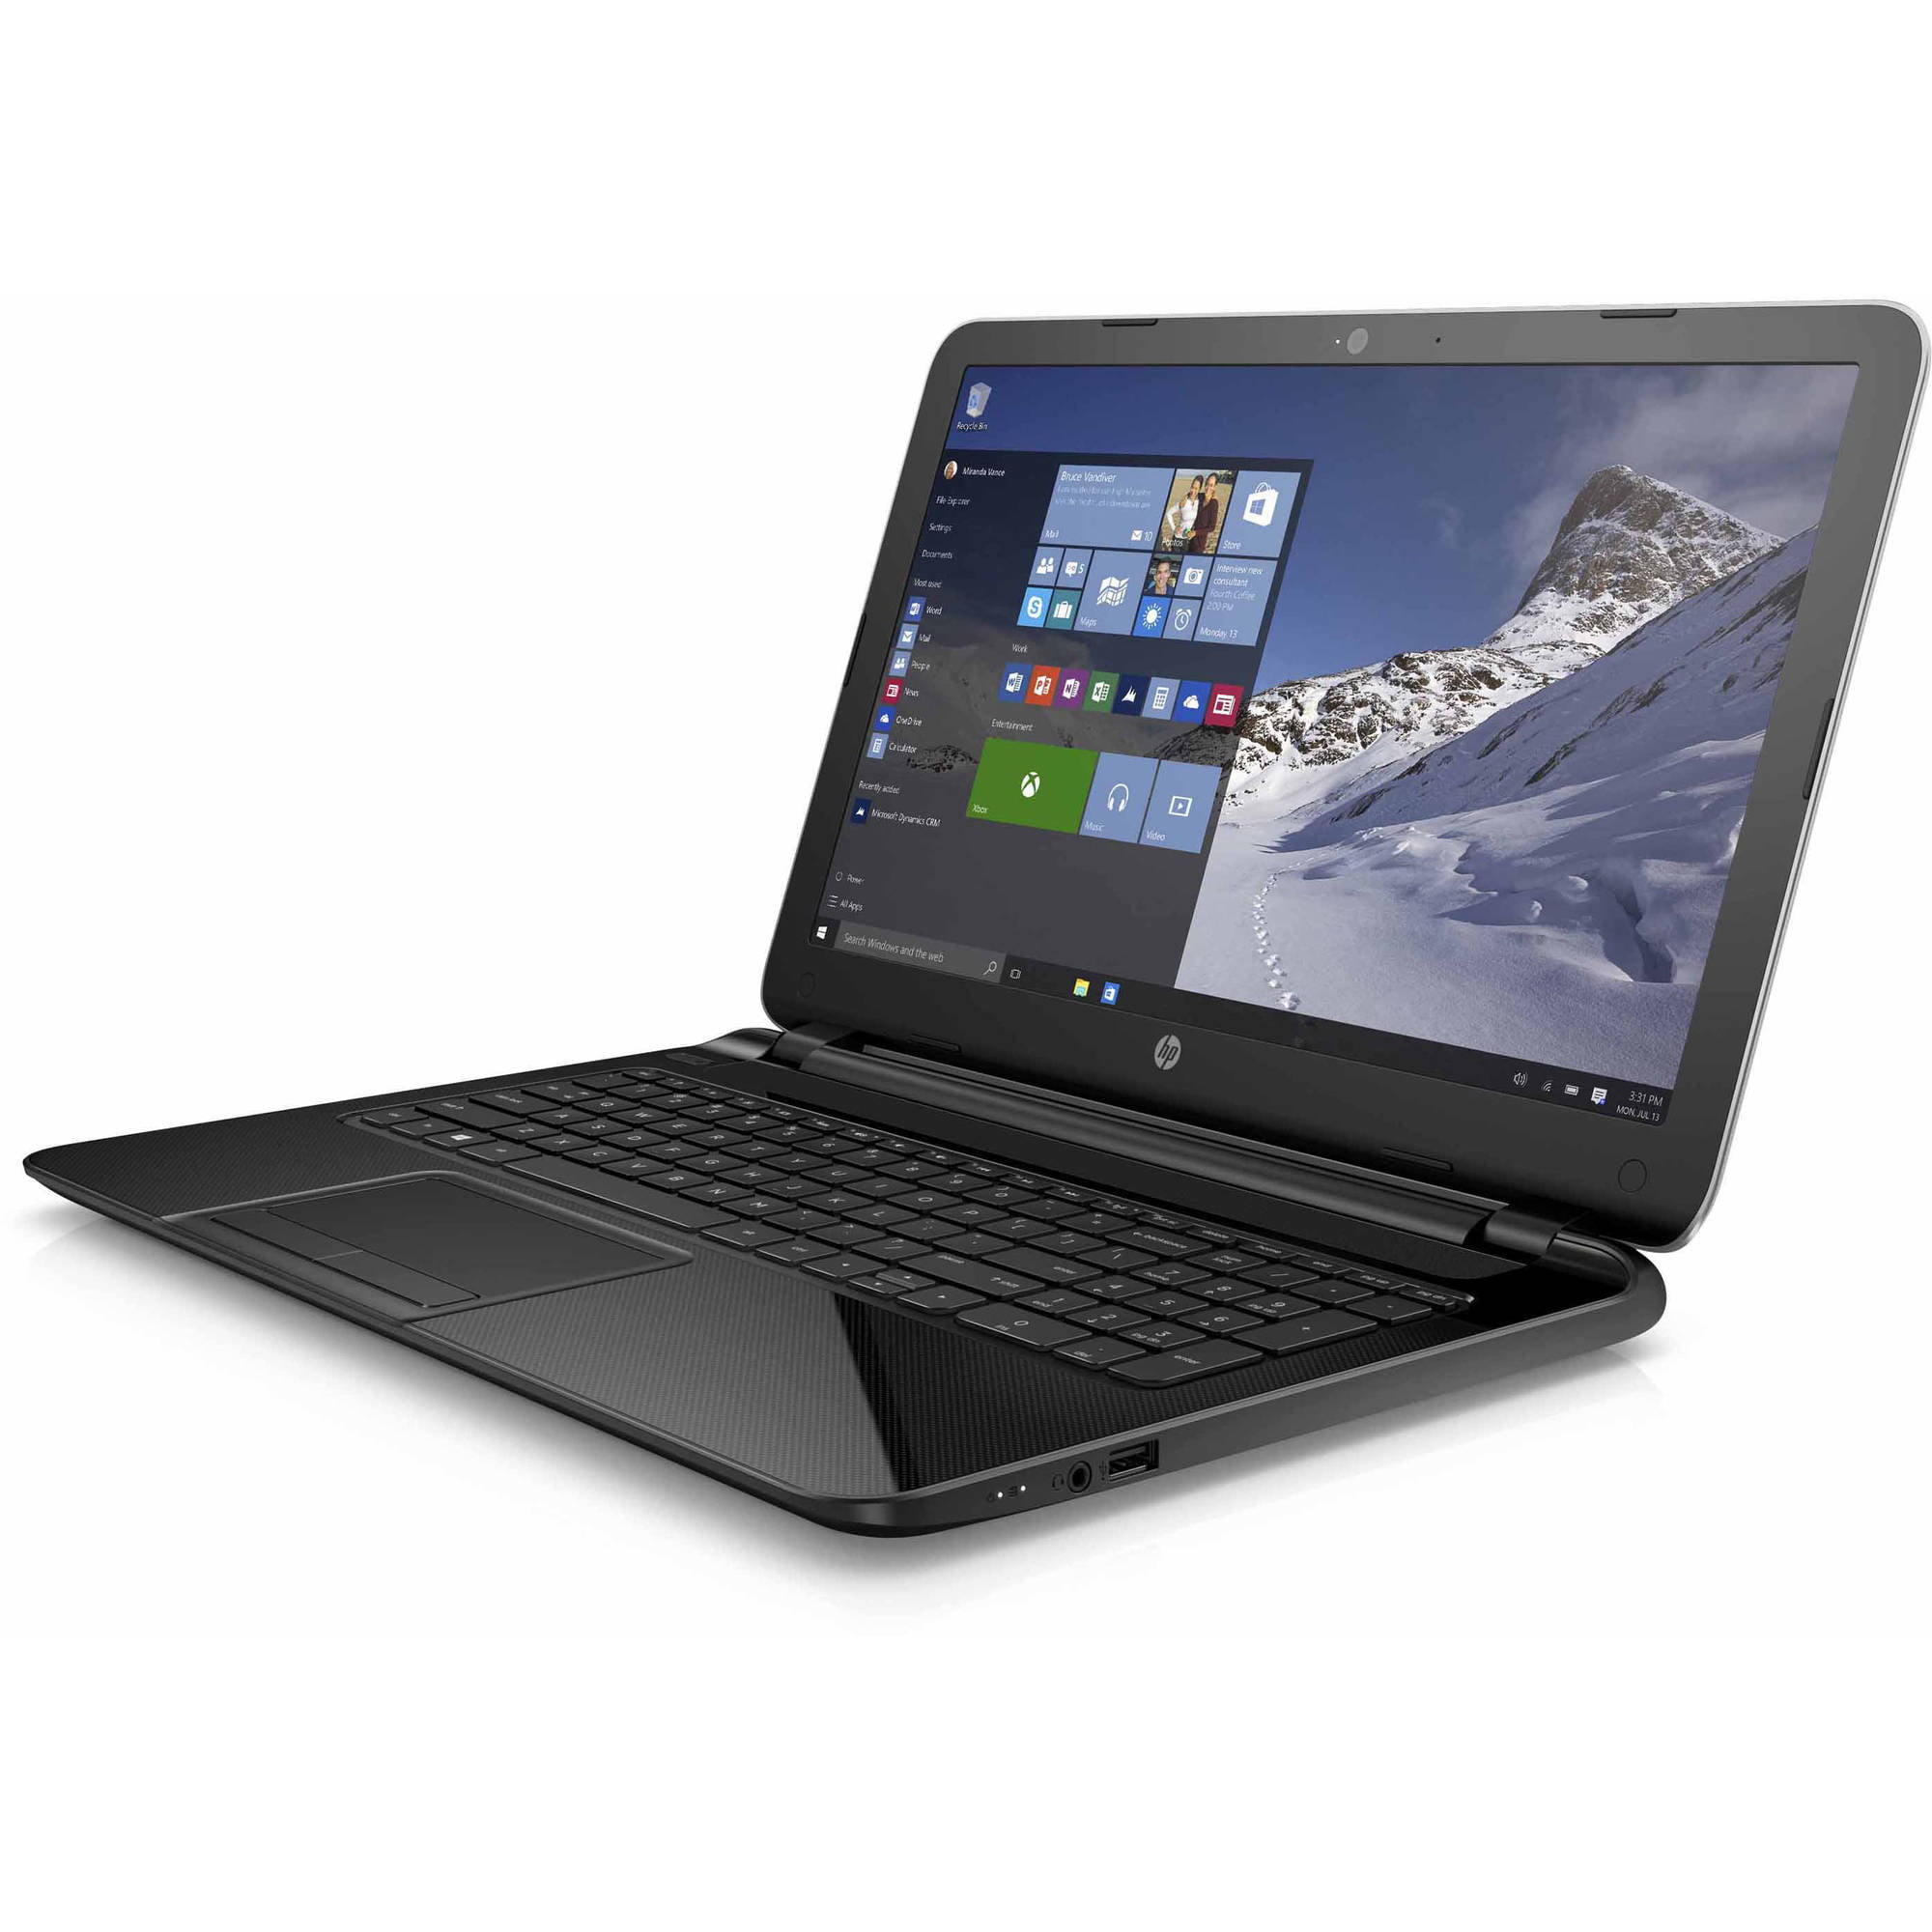 Cheap write my essay preferred branded laptop among users